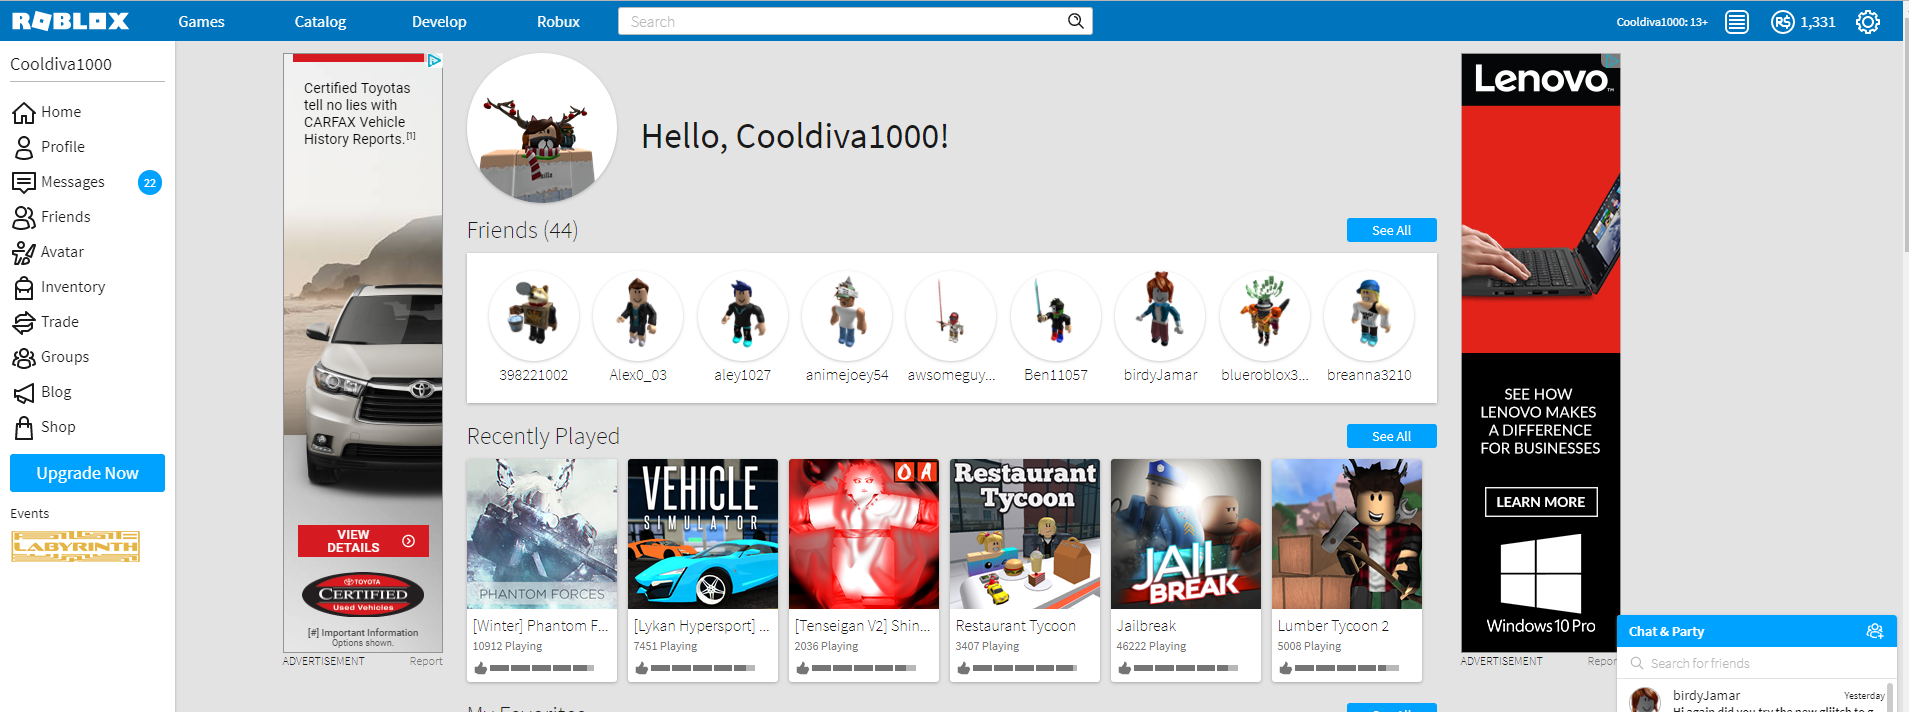 Selling High End 2009 2009 Roblox Female Account Playerup Accounts Marketplace Player 2 Player Secure Platform - selling accounts 2013 2009 roblox forum